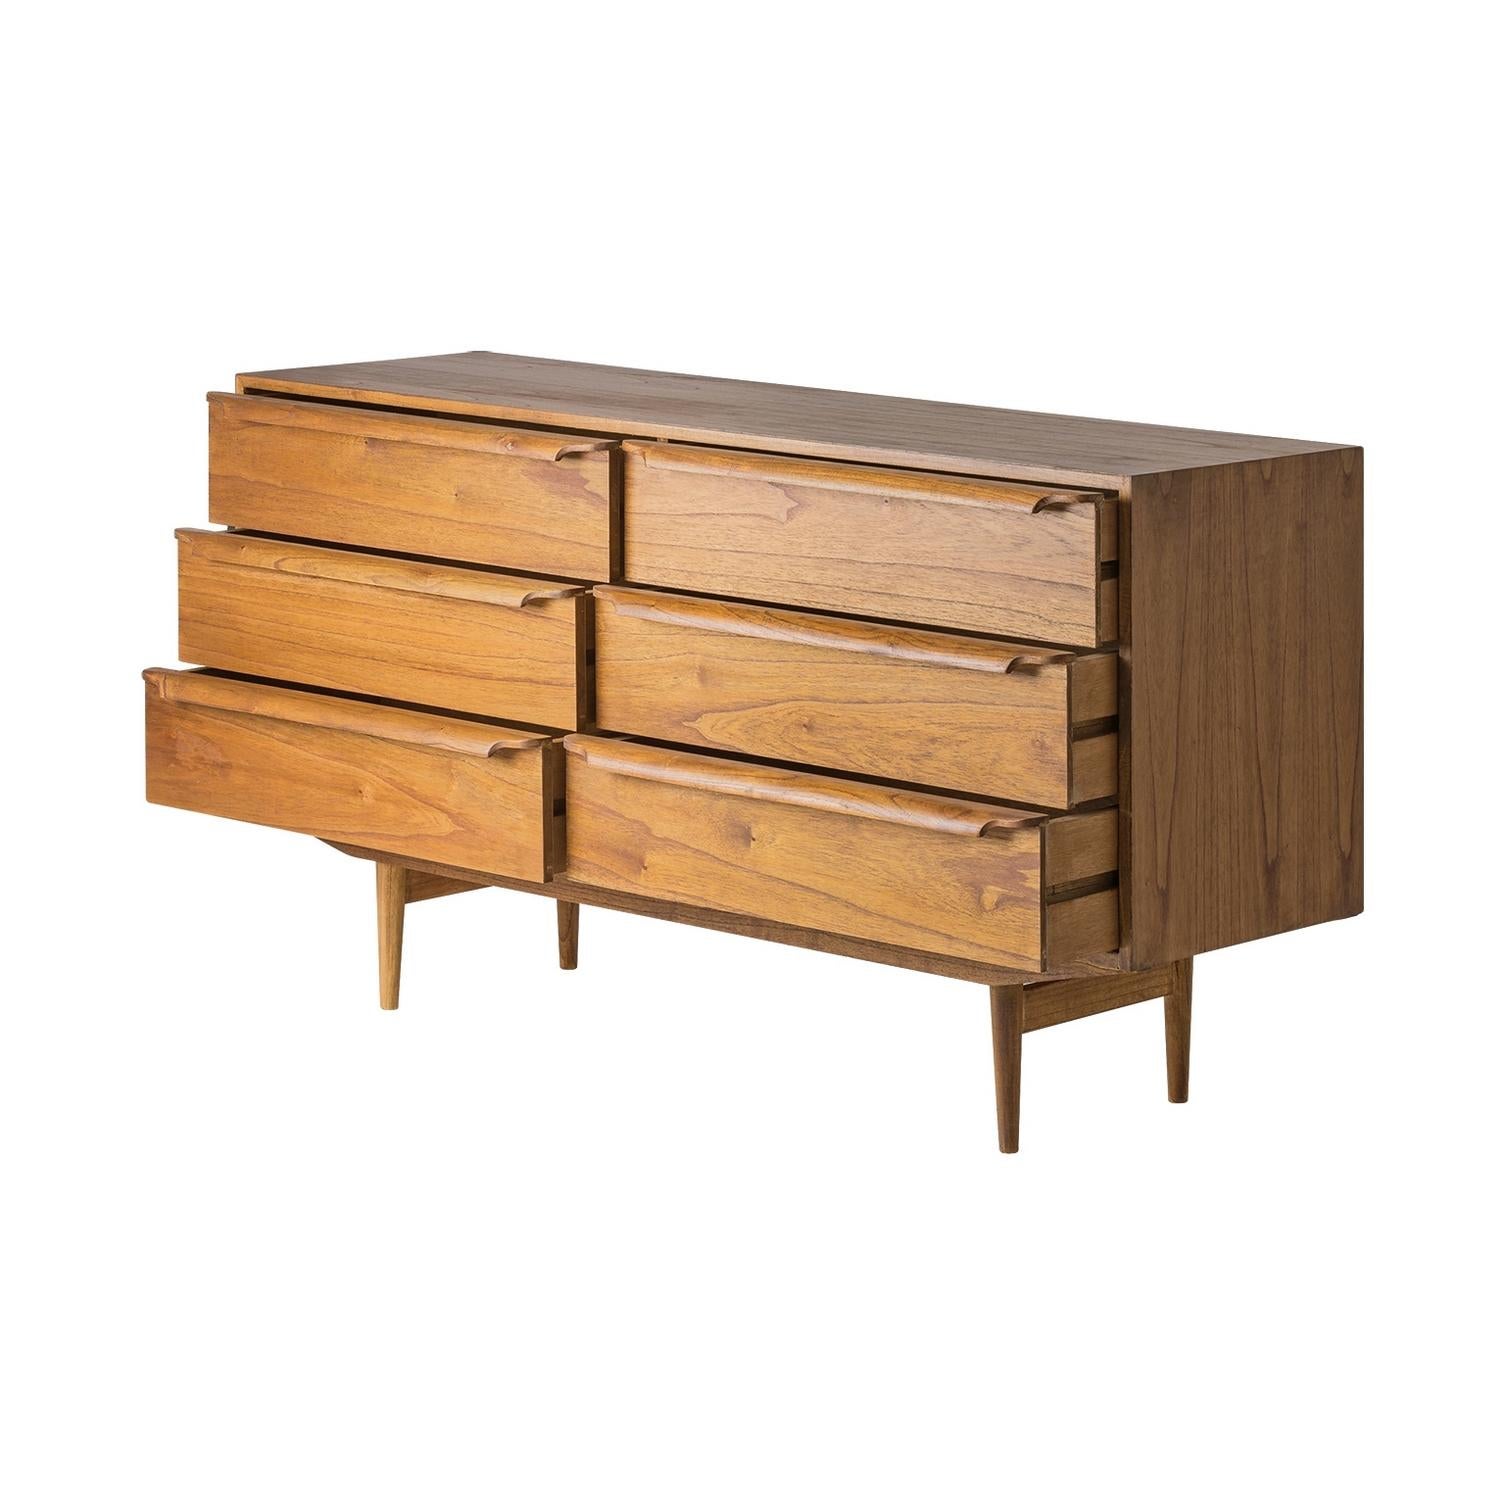 Scandinavian and Danish design with midcentury style for this chest of drawers with sober lines, refined and harmonious, composed of six drawers, nice work on carved wood handles. New item, never used.